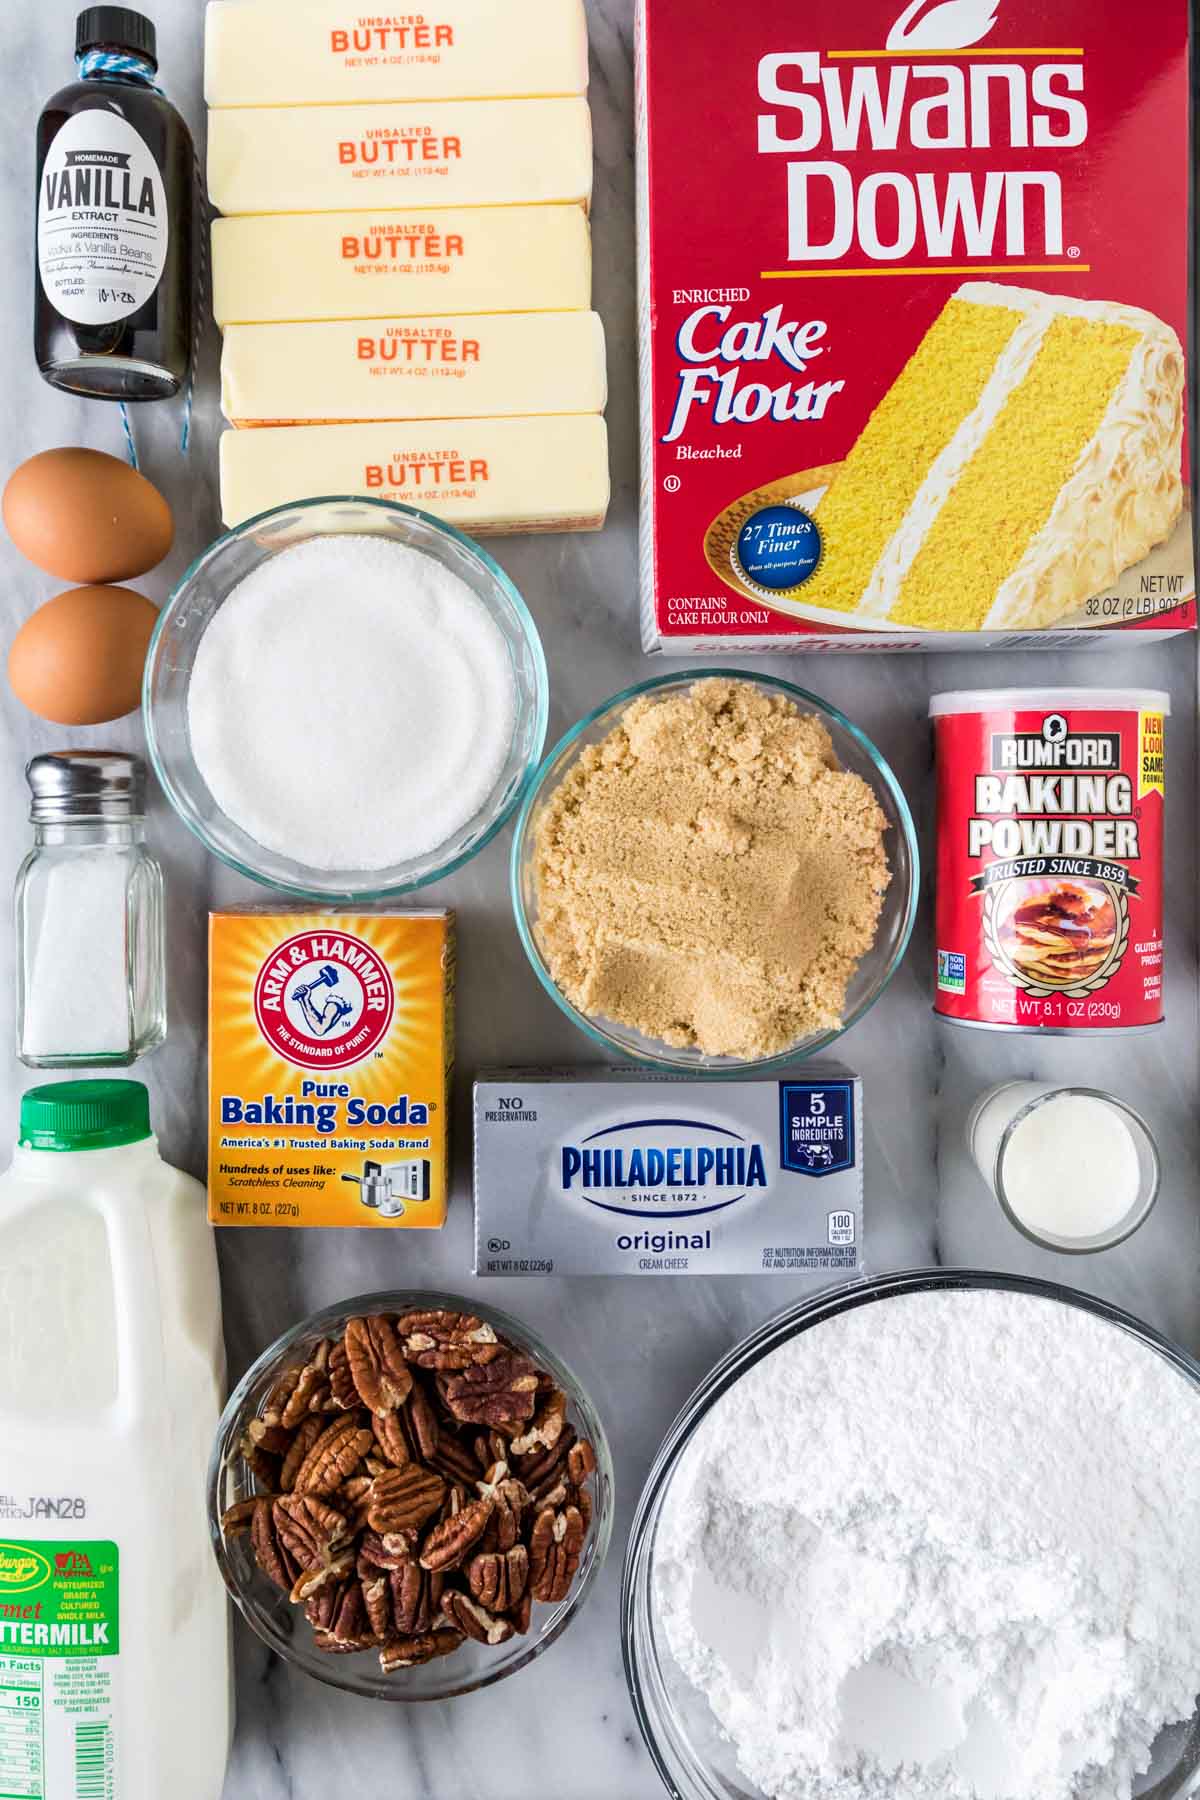 Overhead view of ingredients including cake flour, butter, pecans, buttermilk, and more.